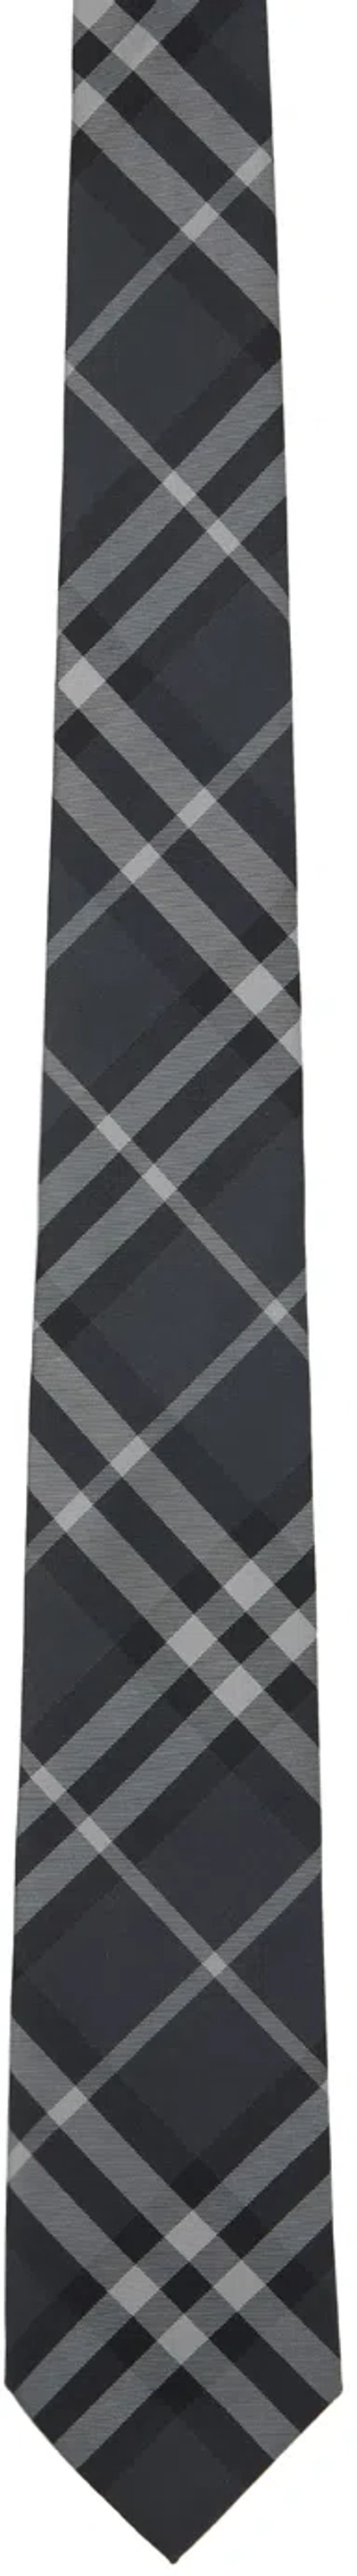 Burberry Gray Check Tie In Charcoal